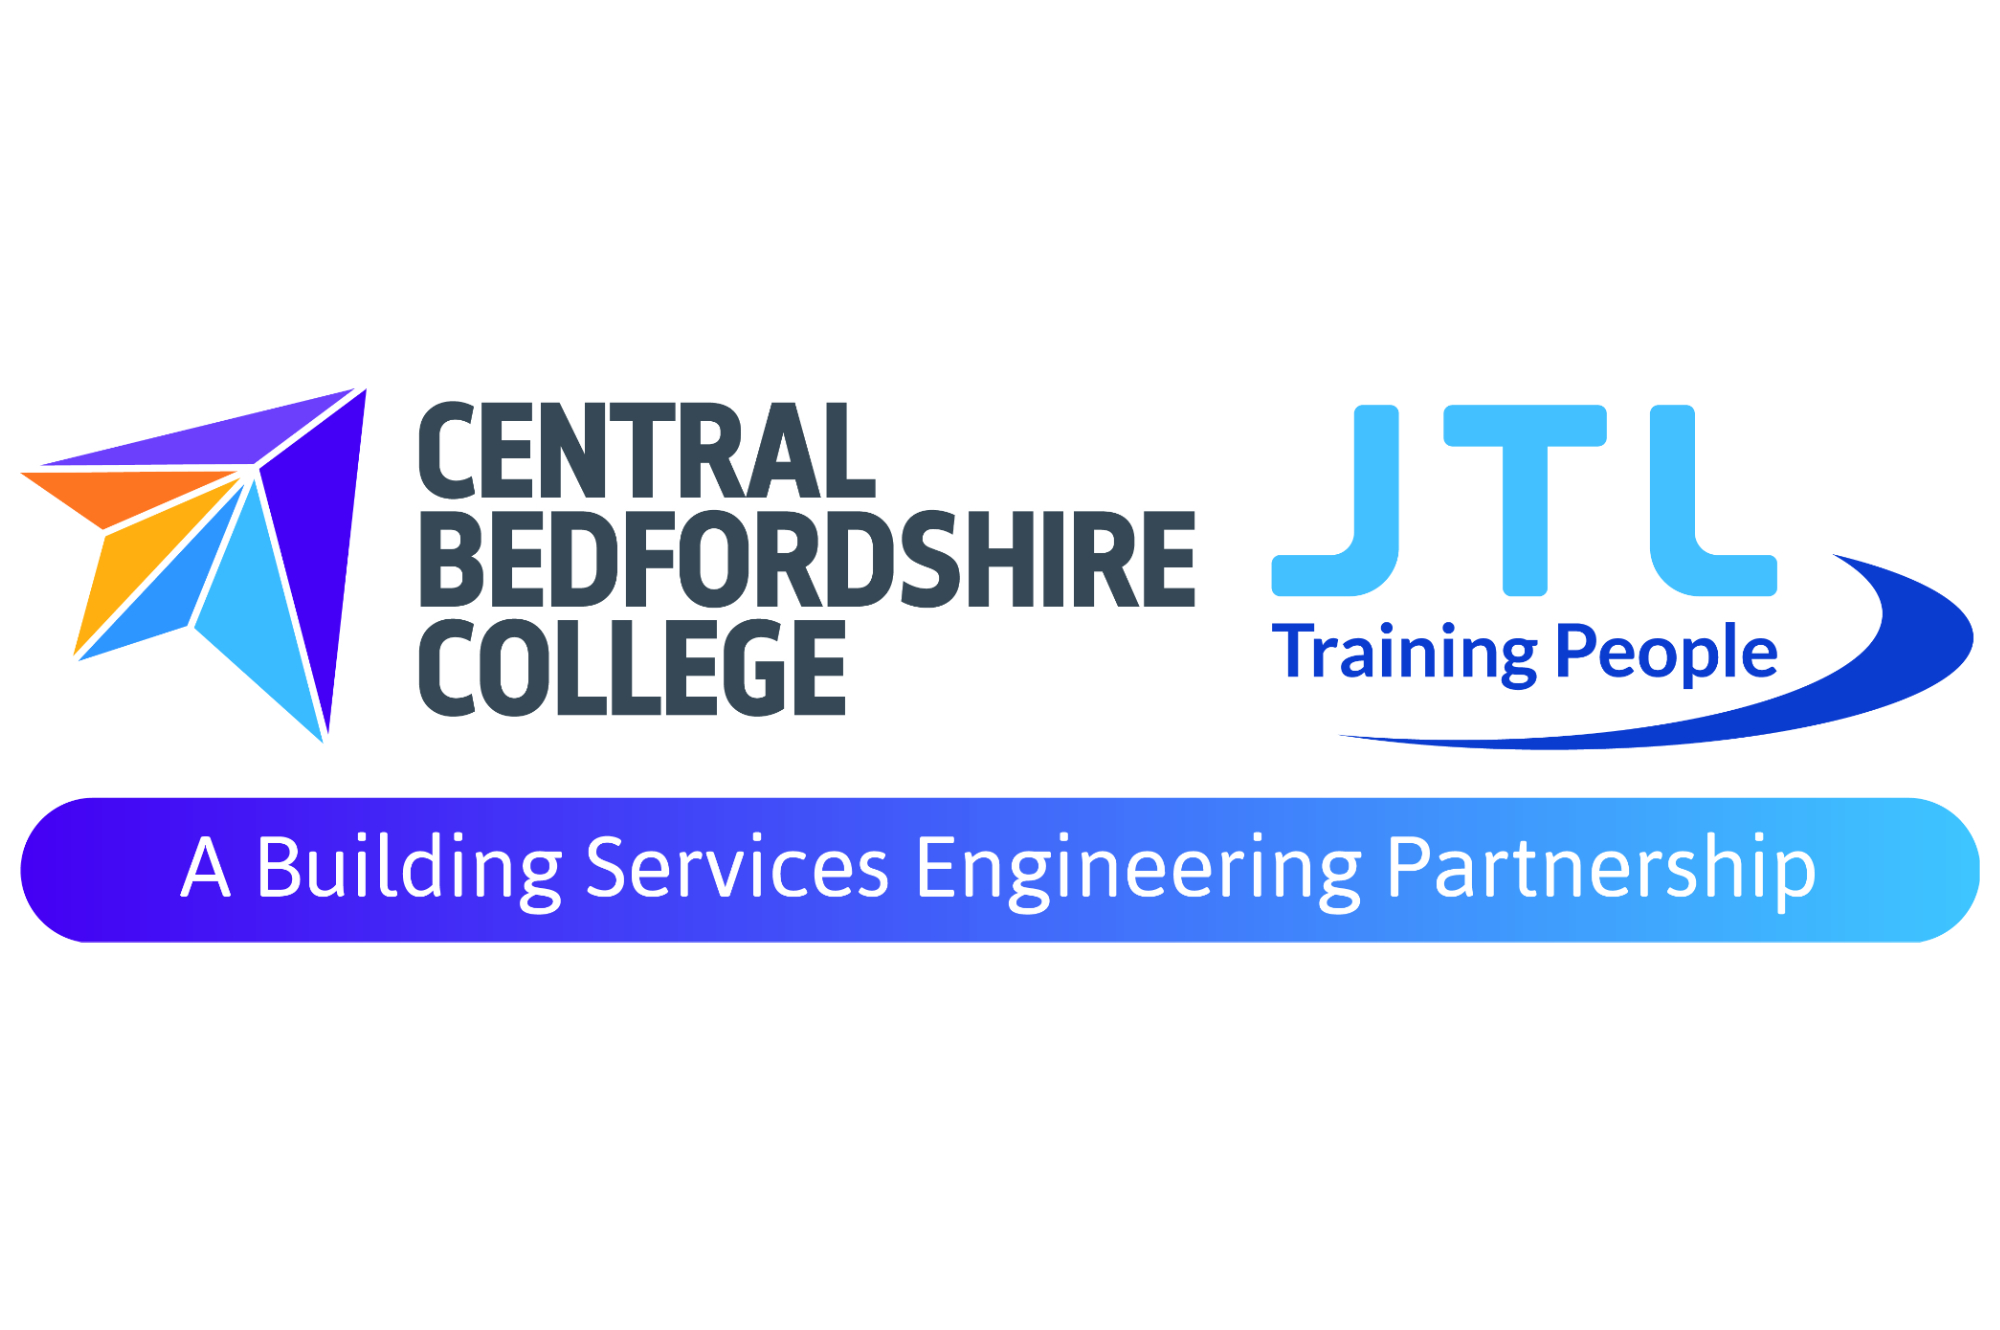 JTL opens apprenticeship applications at Central Bedfordshire College